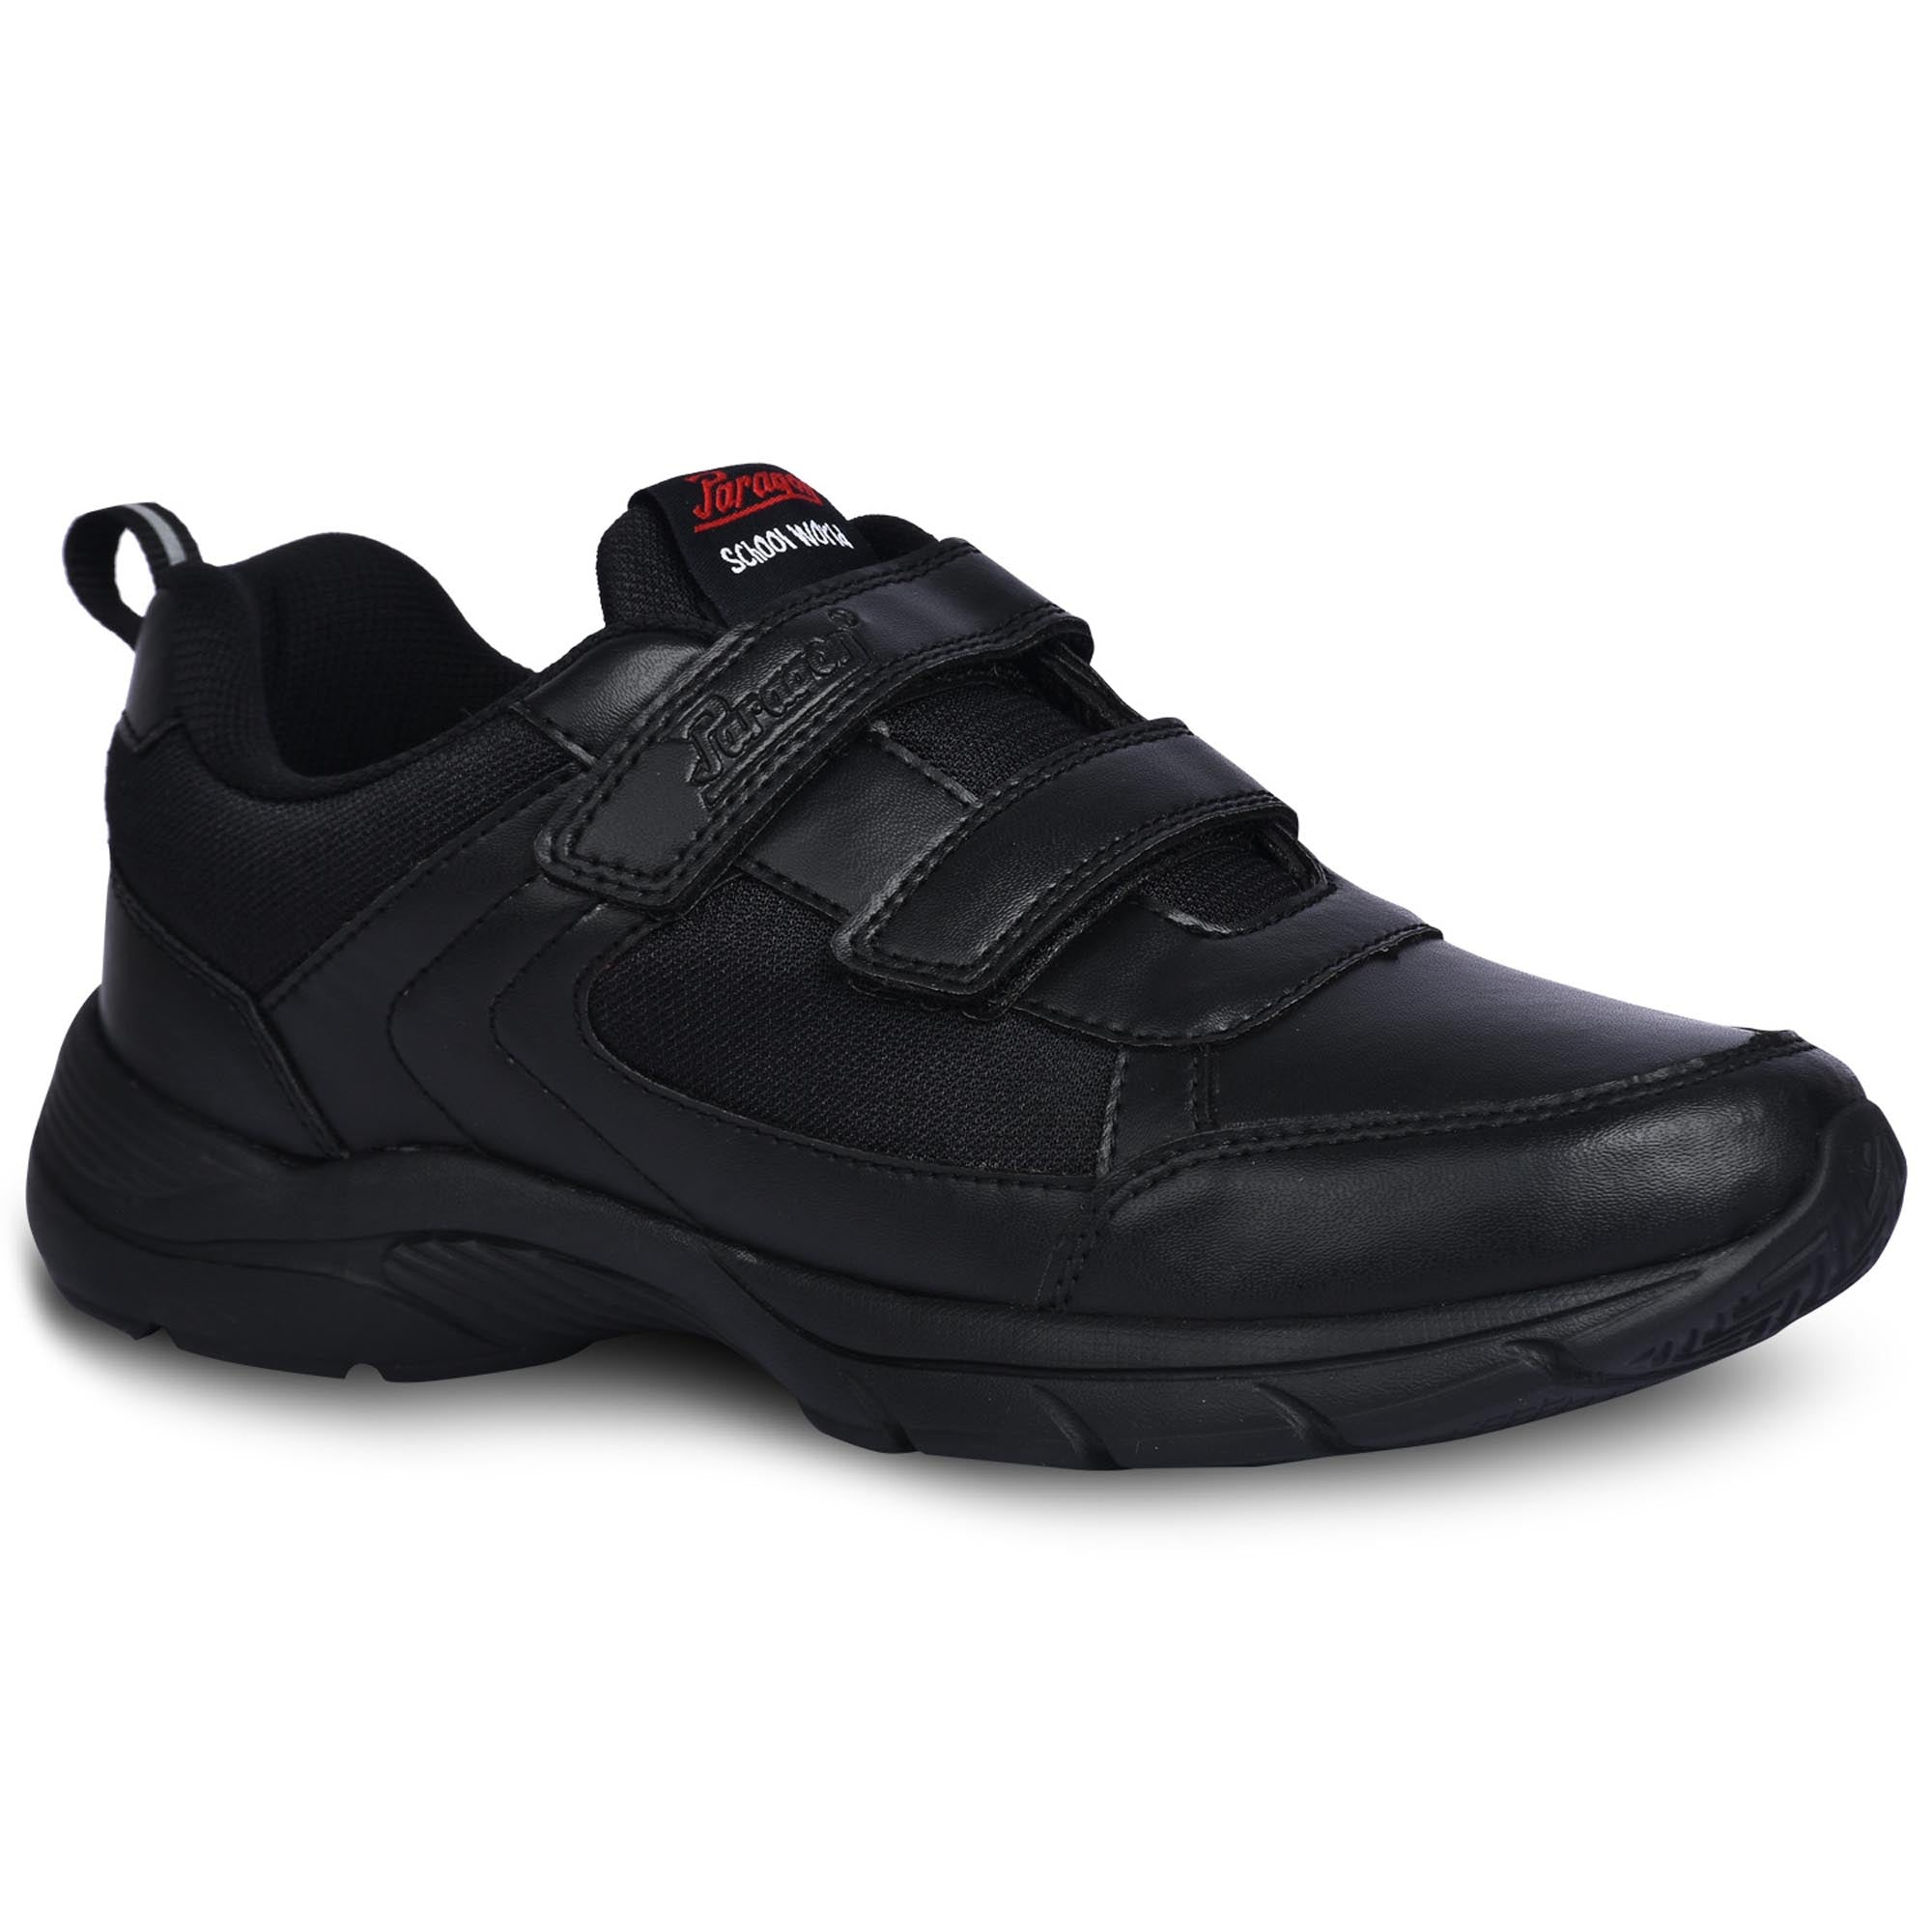 Paragon FBK0774K Kids Boys Girls School Shoes Comfortable Cushioned Soles | Durable | Daily &amp; Occasion wear Black